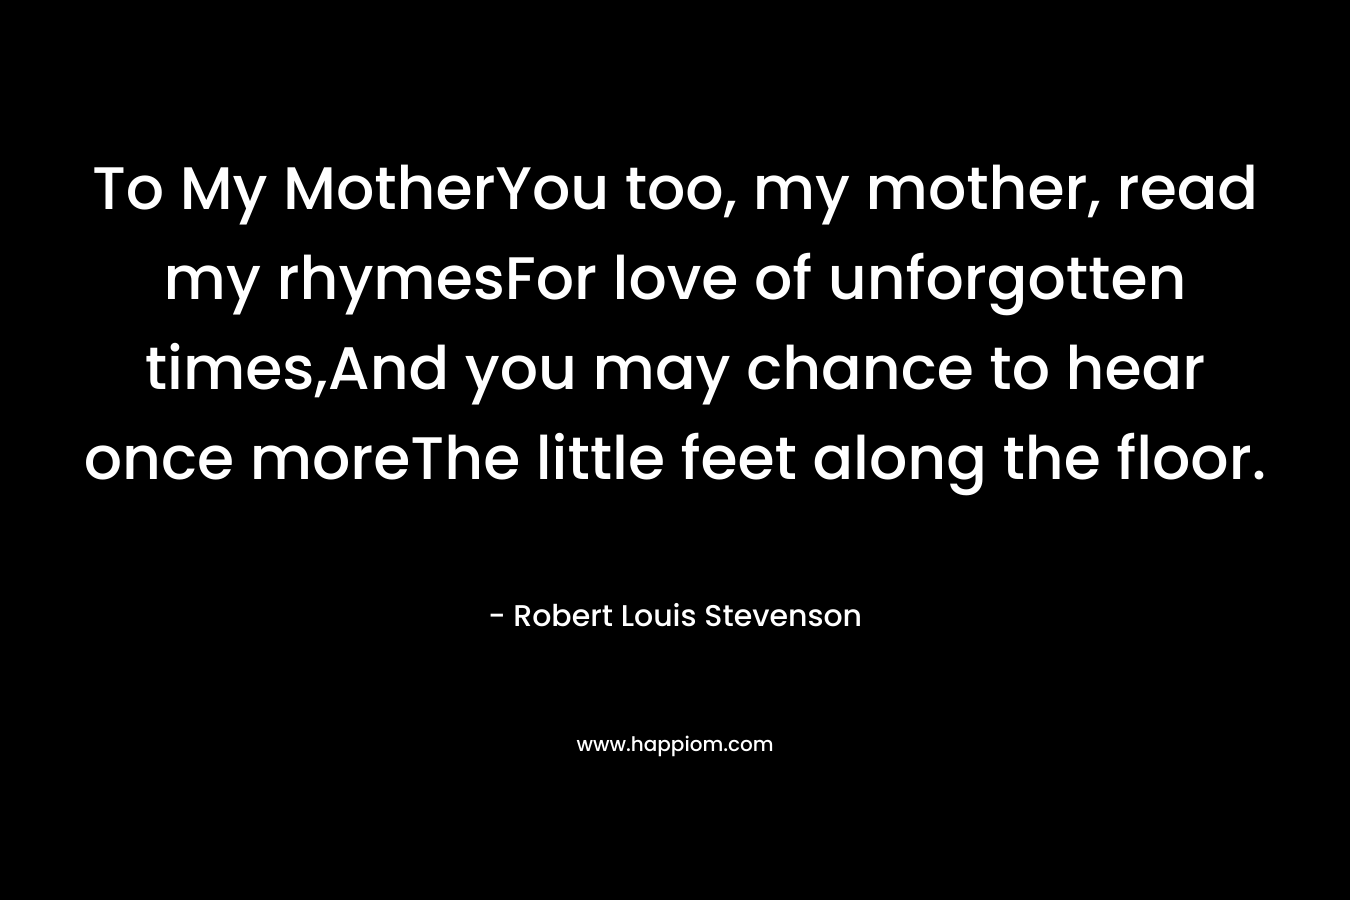 To My MotherYou too, my mother, read my rhymesFor love of unforgotten times,And you may chance to hear once moreThe little feet along the floor.